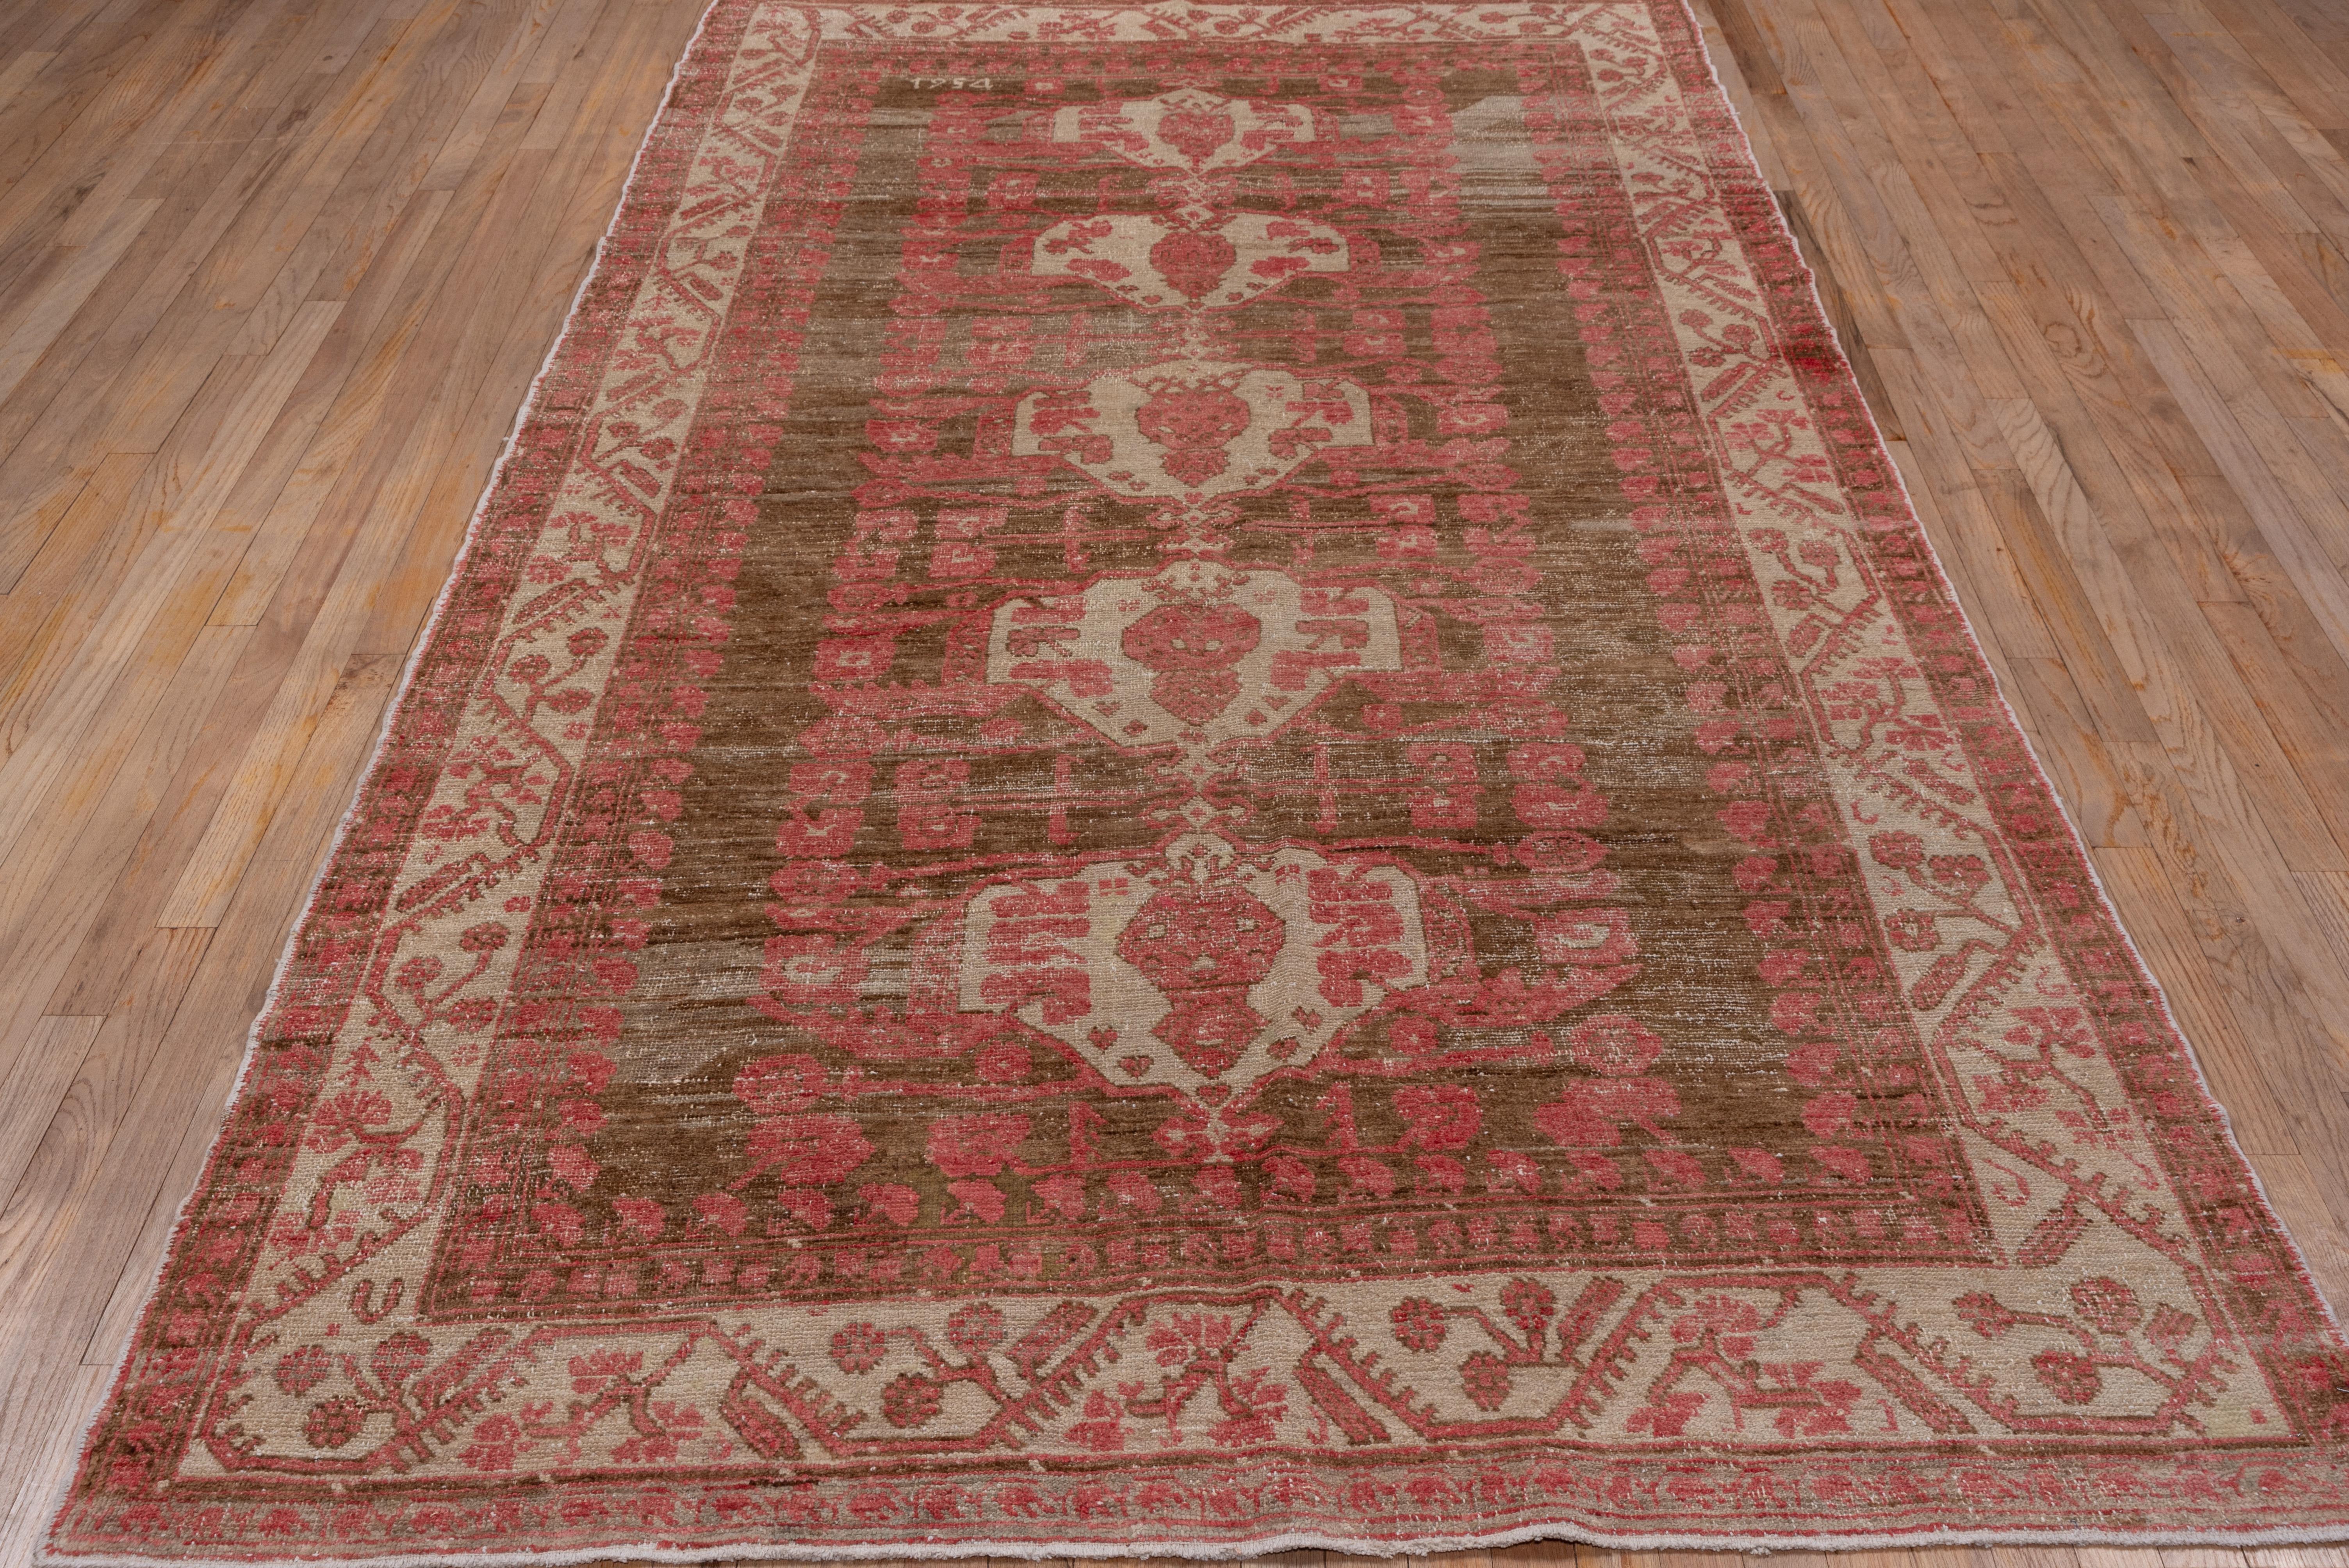 Tribal Antique Pink Turkish Kula Long Rug, circa 1930s, Pink and Brown Field For Sale